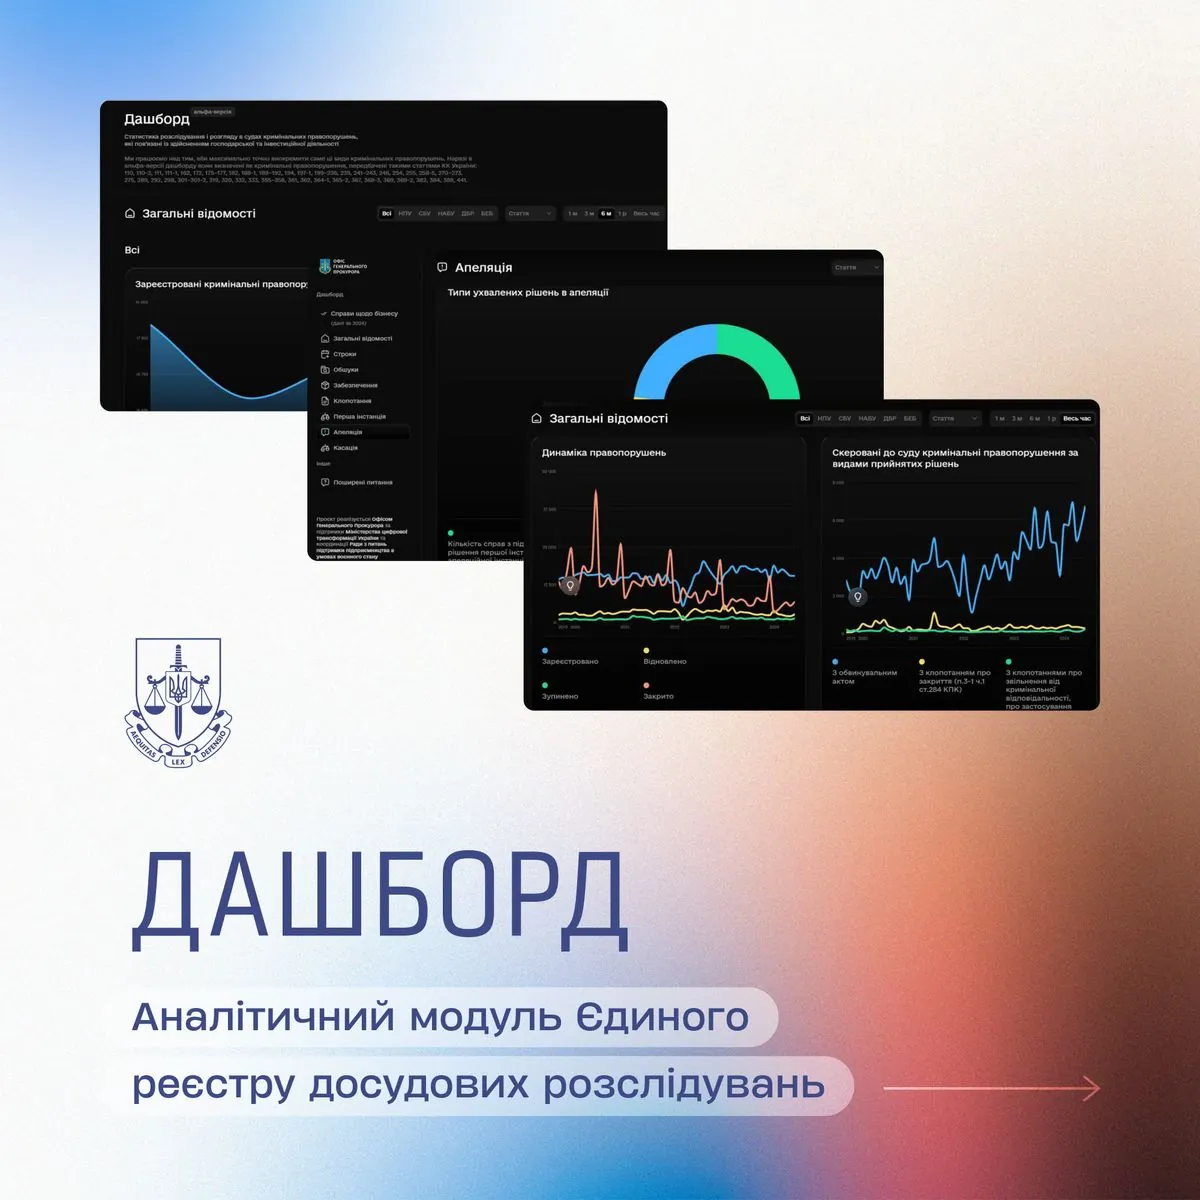 Beta version of the dashboard with data from the Unified Register of Pre-trial Investigations on business proceedings has been launched in Ukraine